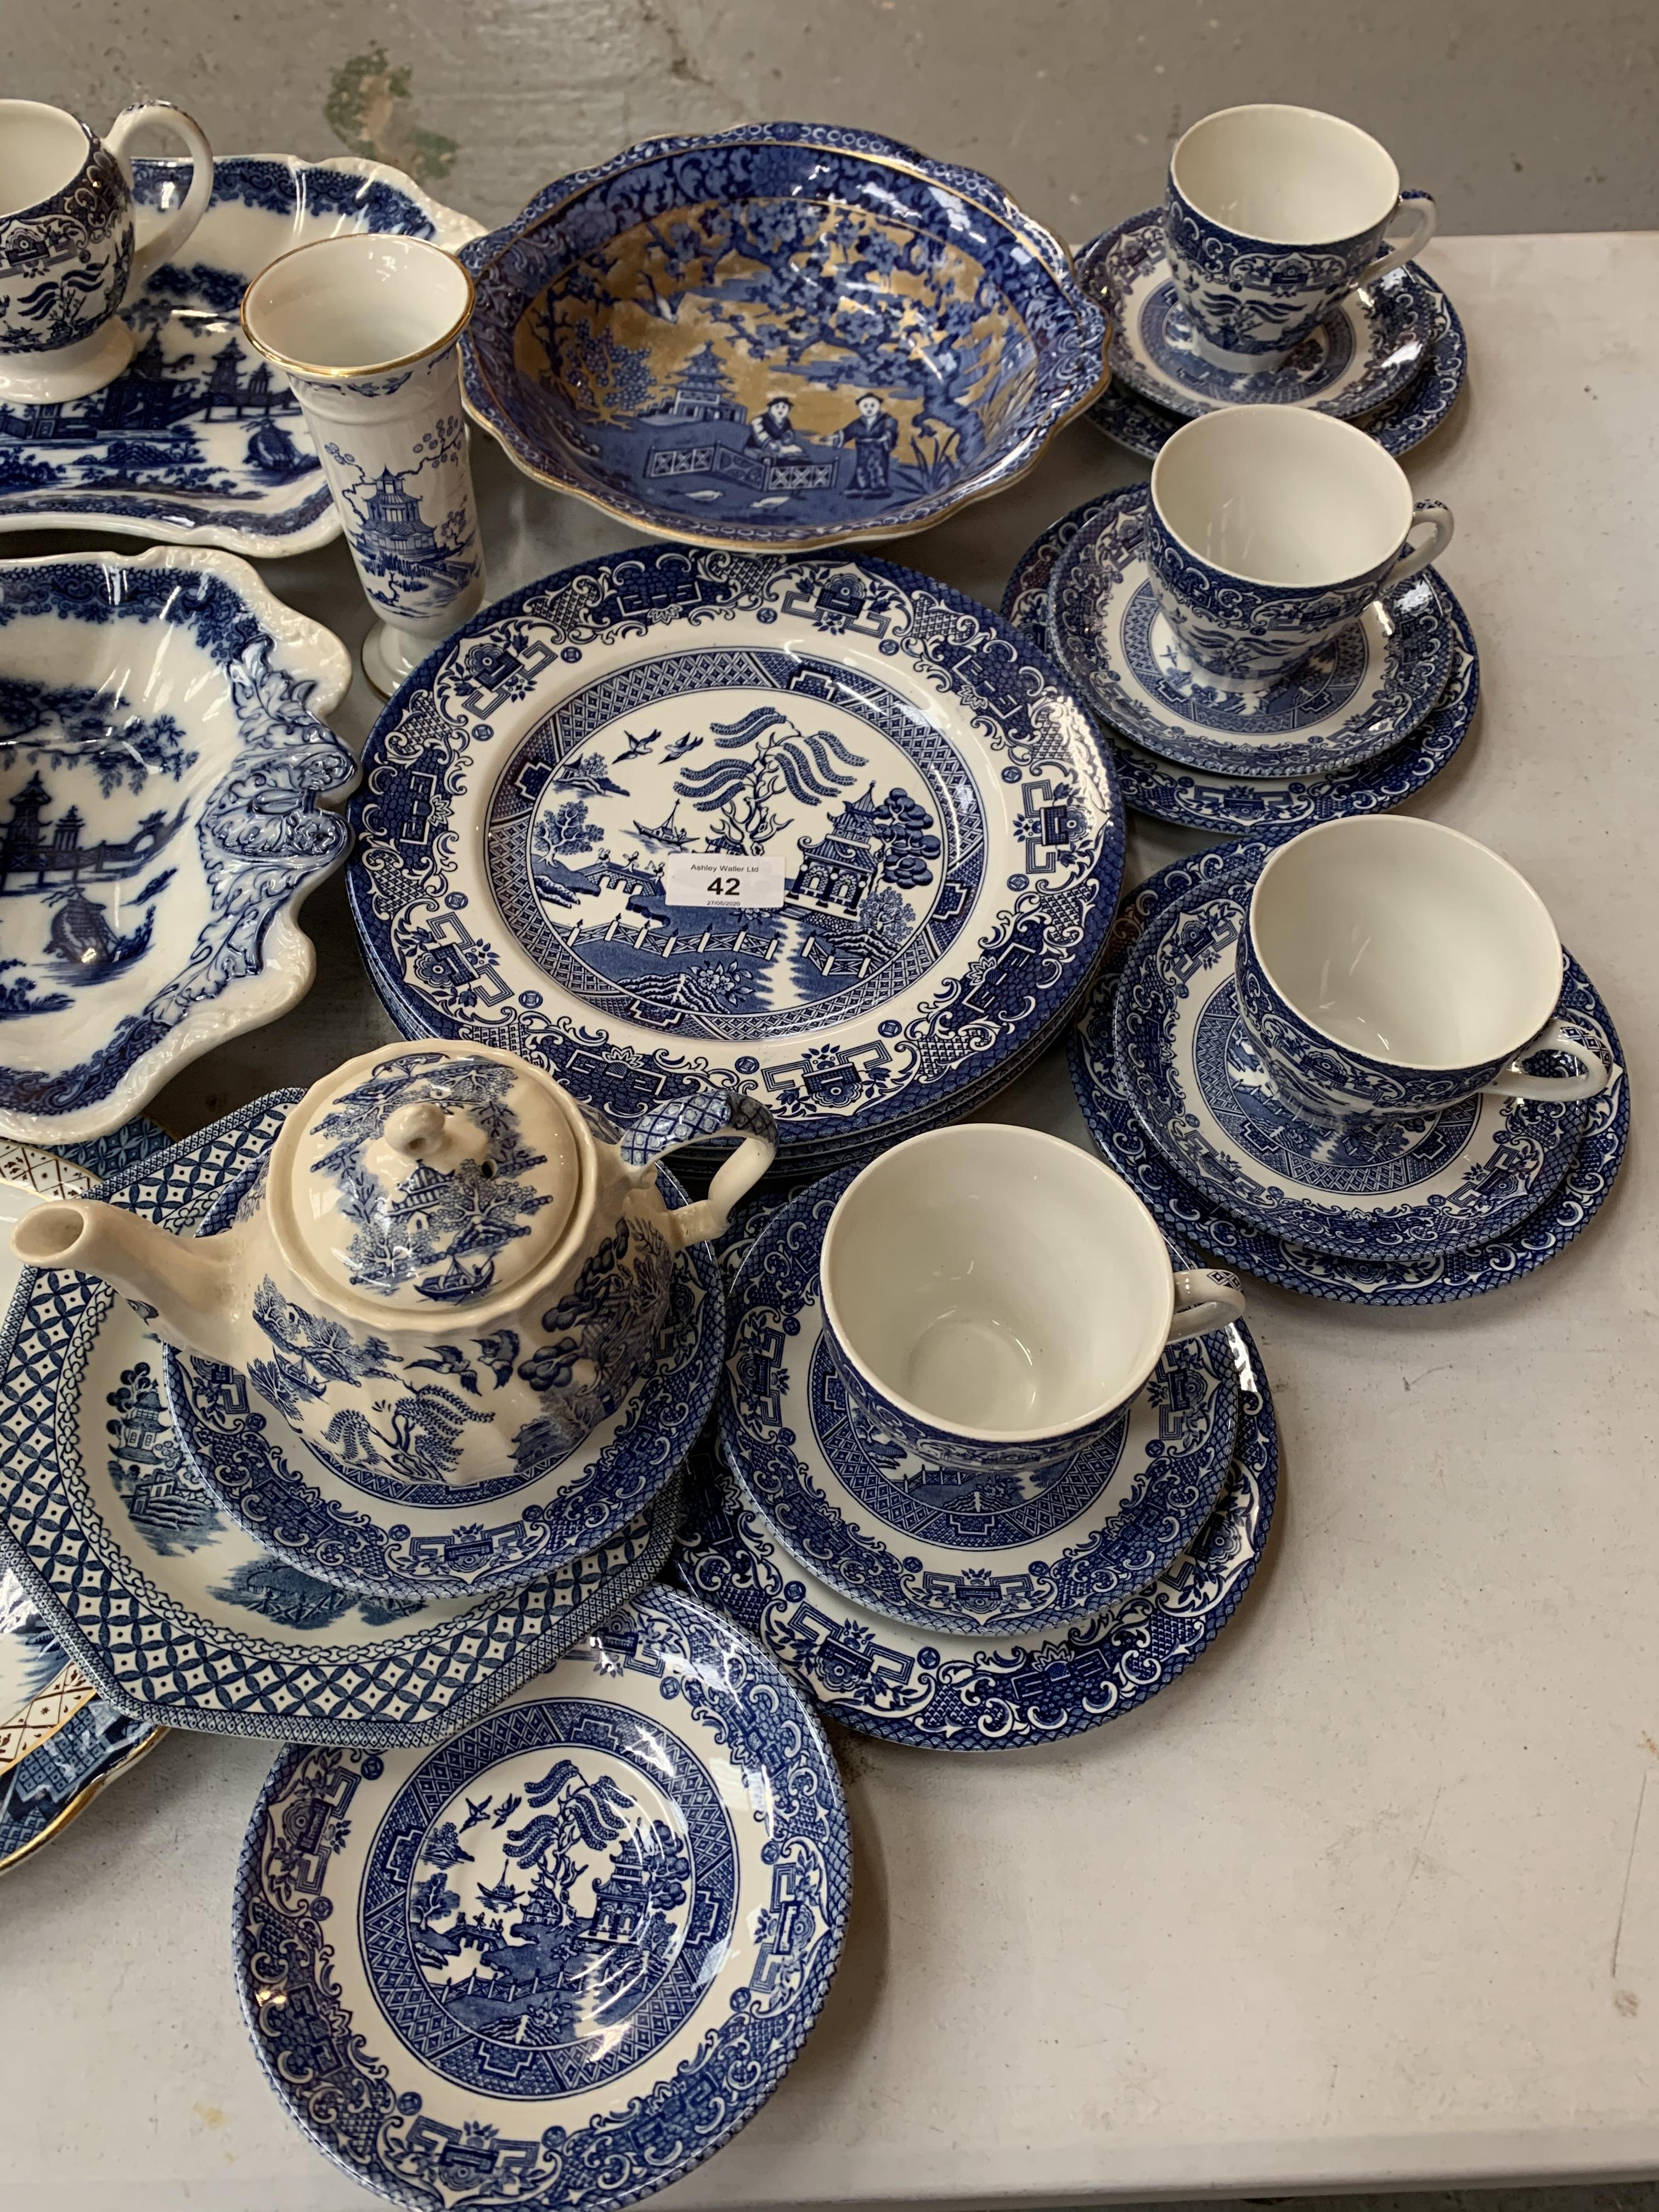 A LARGE COLLECTION OF BLUE AND WHITE POTTERY WITH TO INCLUDE BOWLS, PLATES, CUPS, SAUCERS, TEAPOT - Image 2 of 3